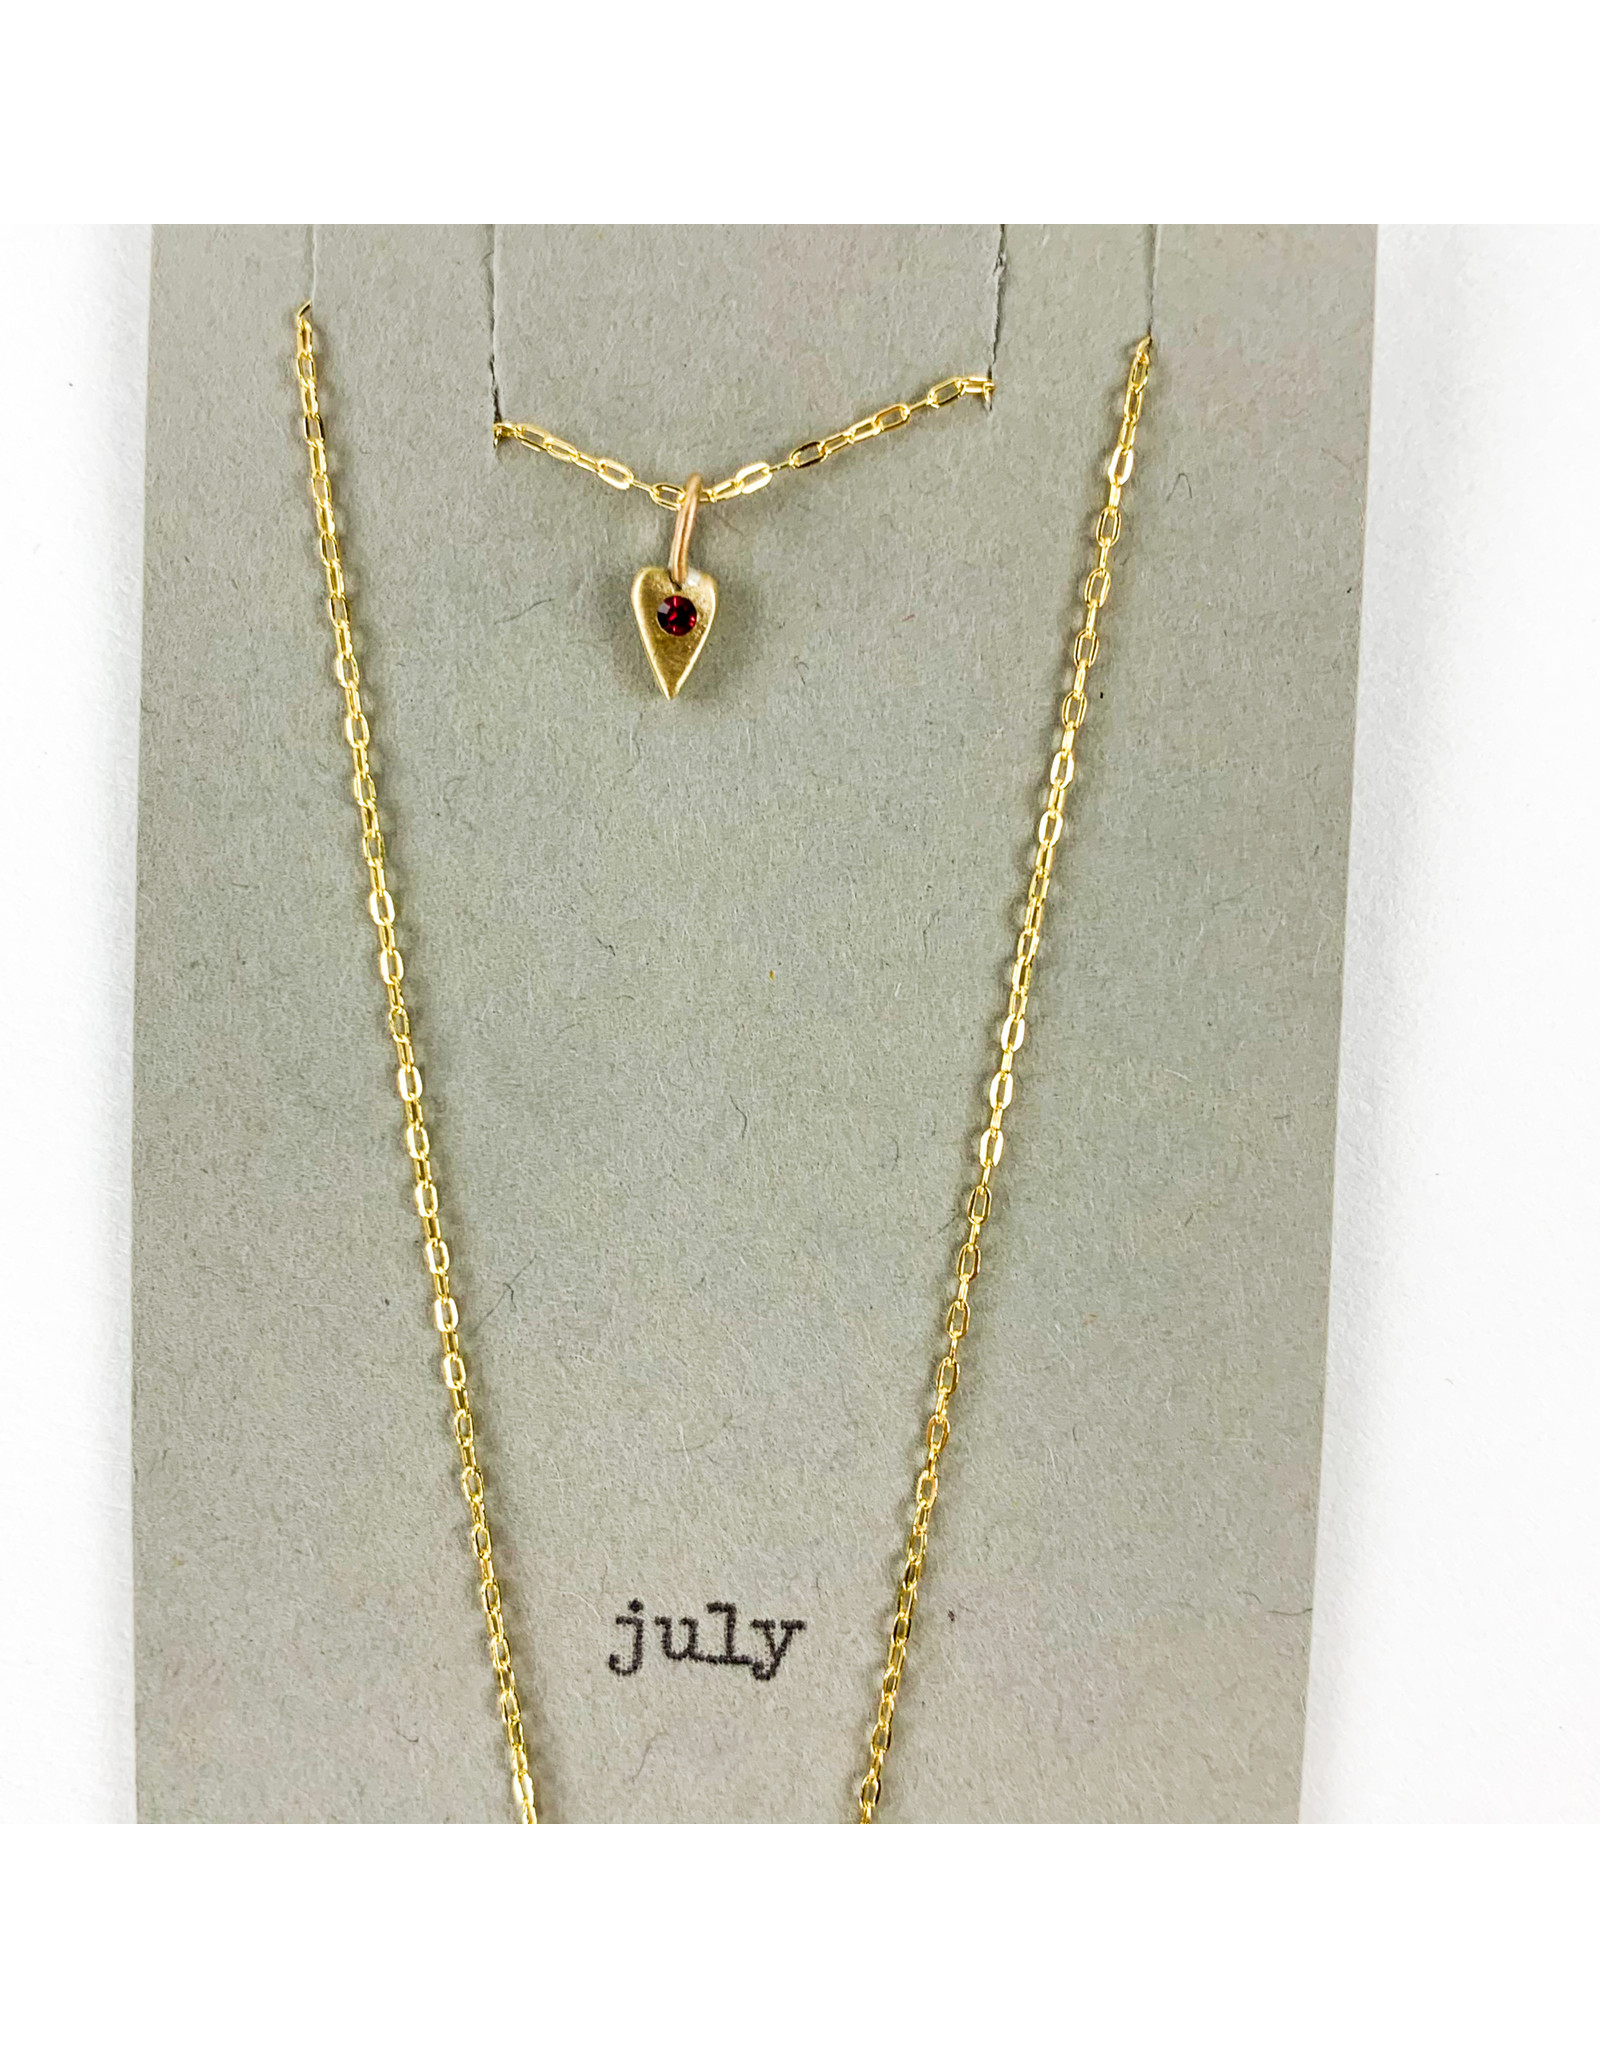 Penny Larsen July Necklace/ Ruby Gold Chain